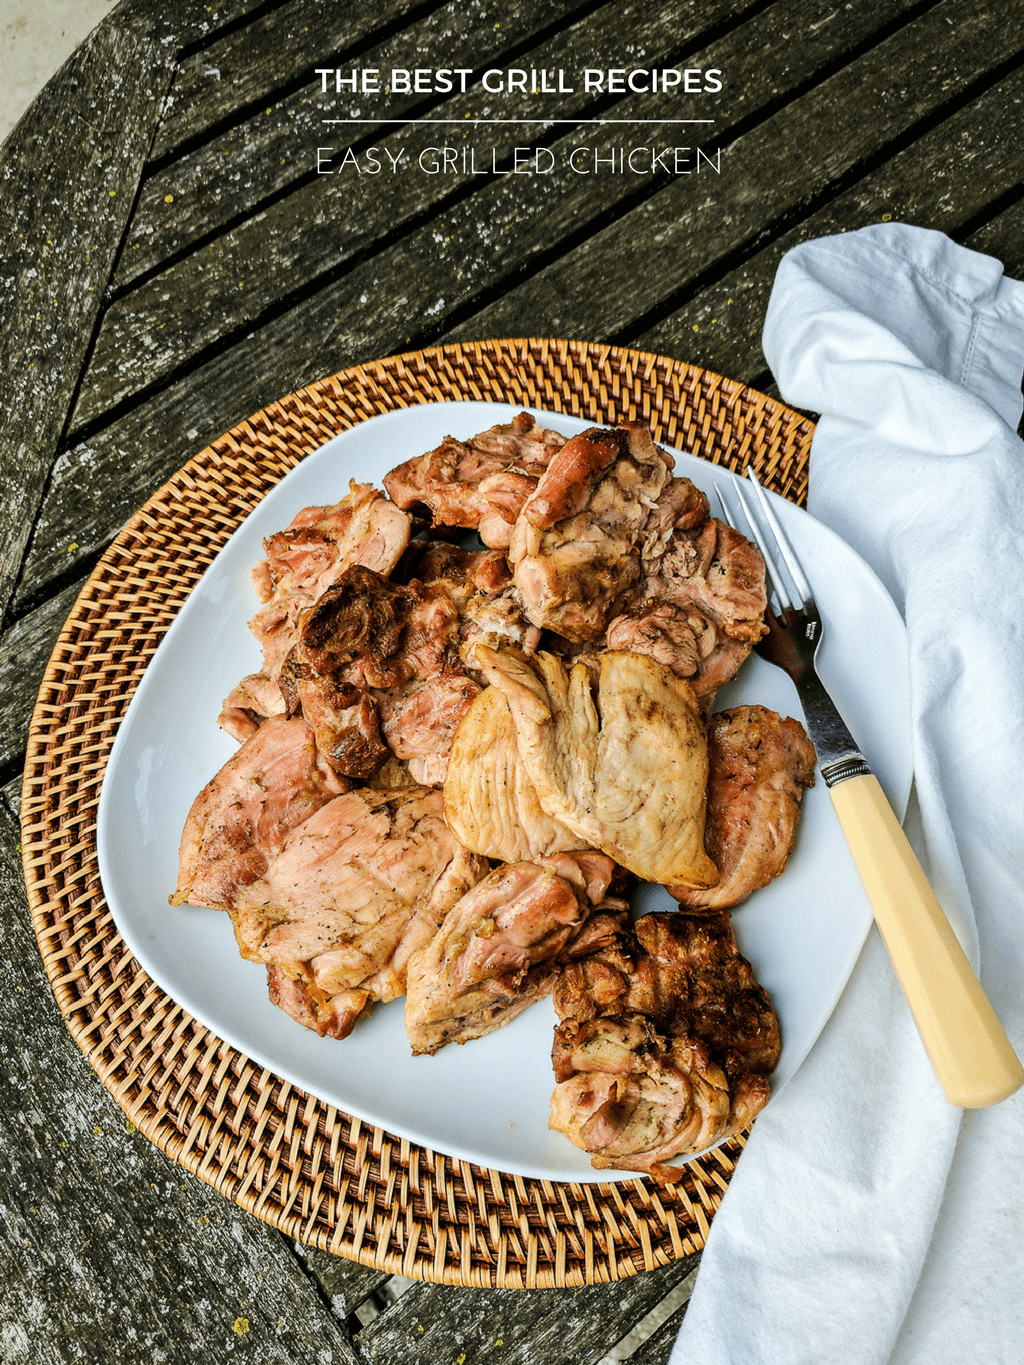 The best grilled chicken recipe! Originally from Upstate New York, this easy grilled chicken marinade is super tasty and cheap enough to serve a crowd.